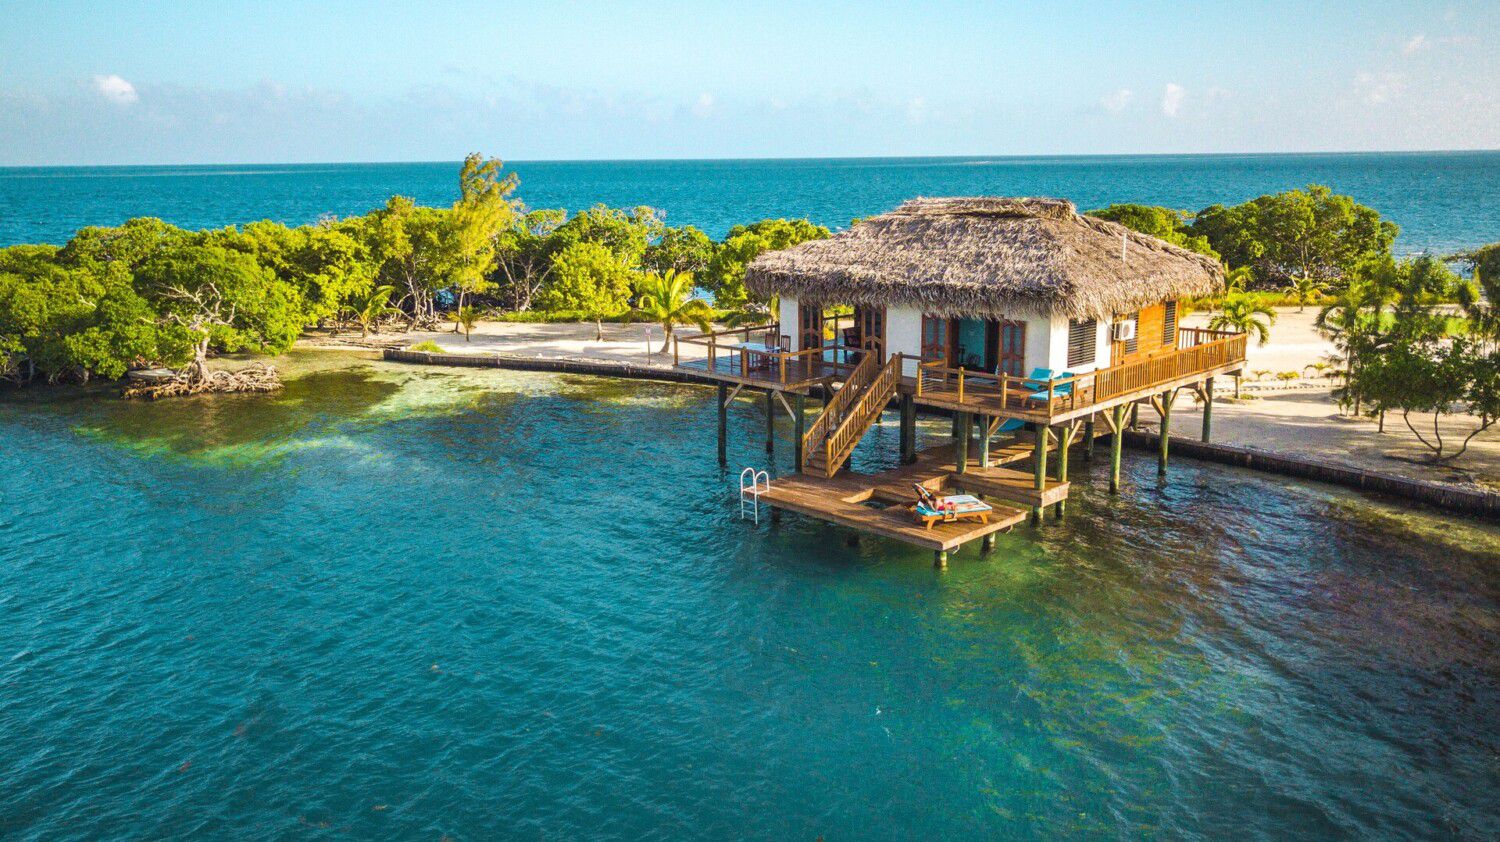 <p>You are longing for a vacation, and you really want to get away from it all. How about a <a href="https://www.simplemost.com/14-private-islands-you-can-actually-afford-to-rent-for-family-vacations/">private island</a>? You can have your own little slice of paradise while still enjoying all the comforts and amenities of home.</p><p>Vacationing on a <a href="https://www.simplemost.com/private-islands-you-can-only-visit-via-cruise-ship/">private island</a> would be an unforgettable experience, and with Vrbo, it’s possible. So whether you’re looking for a romantic getaway or a family adventure, plenty of beautiful hideaways are scattered across the world that fit the bill perfectly.</p><p>Imagine spending your days lounging on the beach or exploring the local area. Whatever you choose to do, you’re sure to have a fantastic time. Check out these island rentals that are can currently get away to.</p>